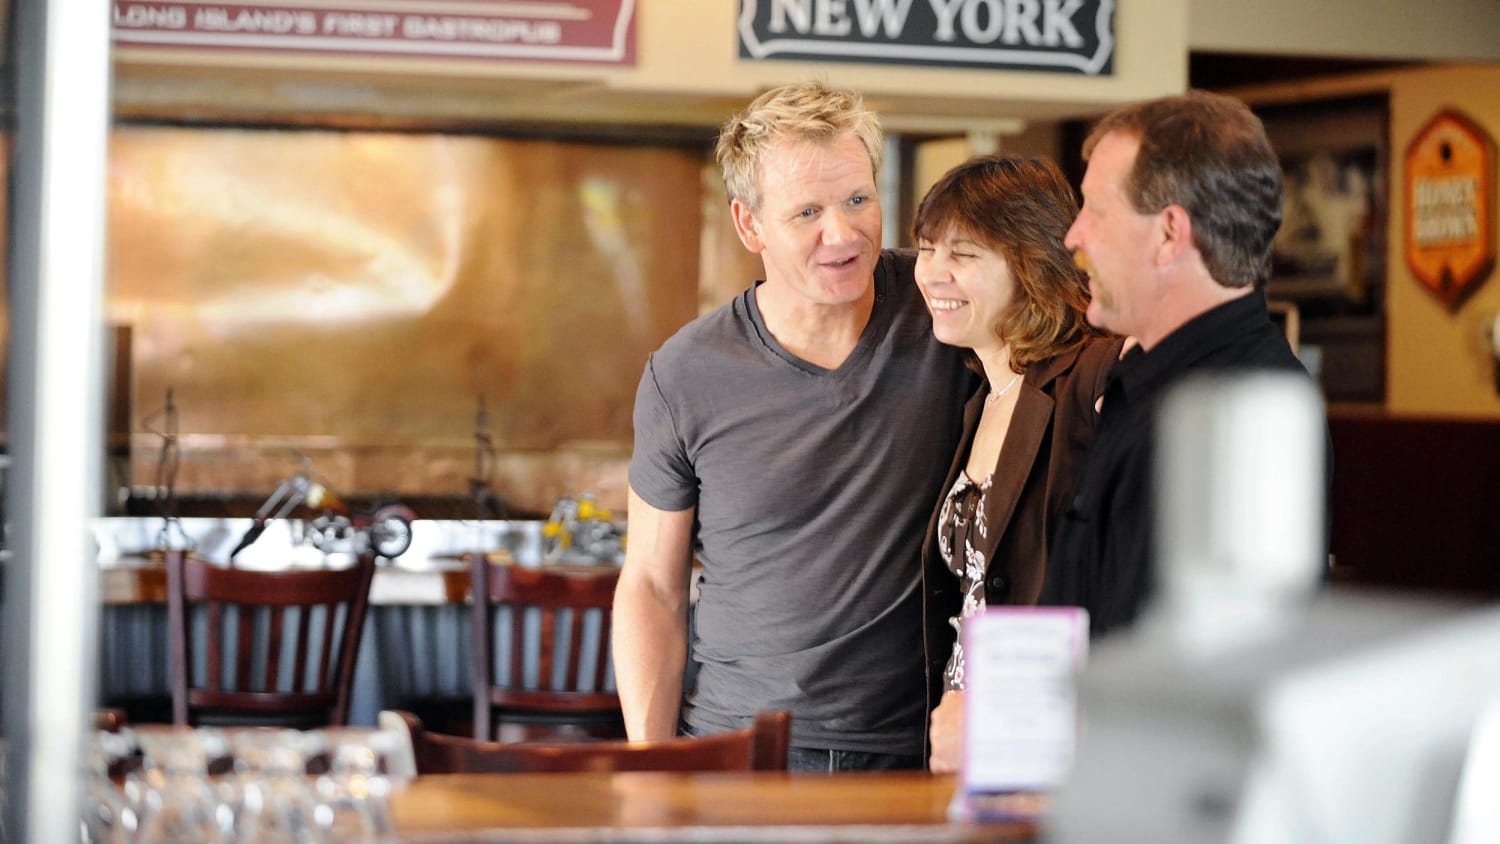 See Gordon Ramsay39;s 5 Nicest Moments on 39;Kitchen Nightmares39;  NB